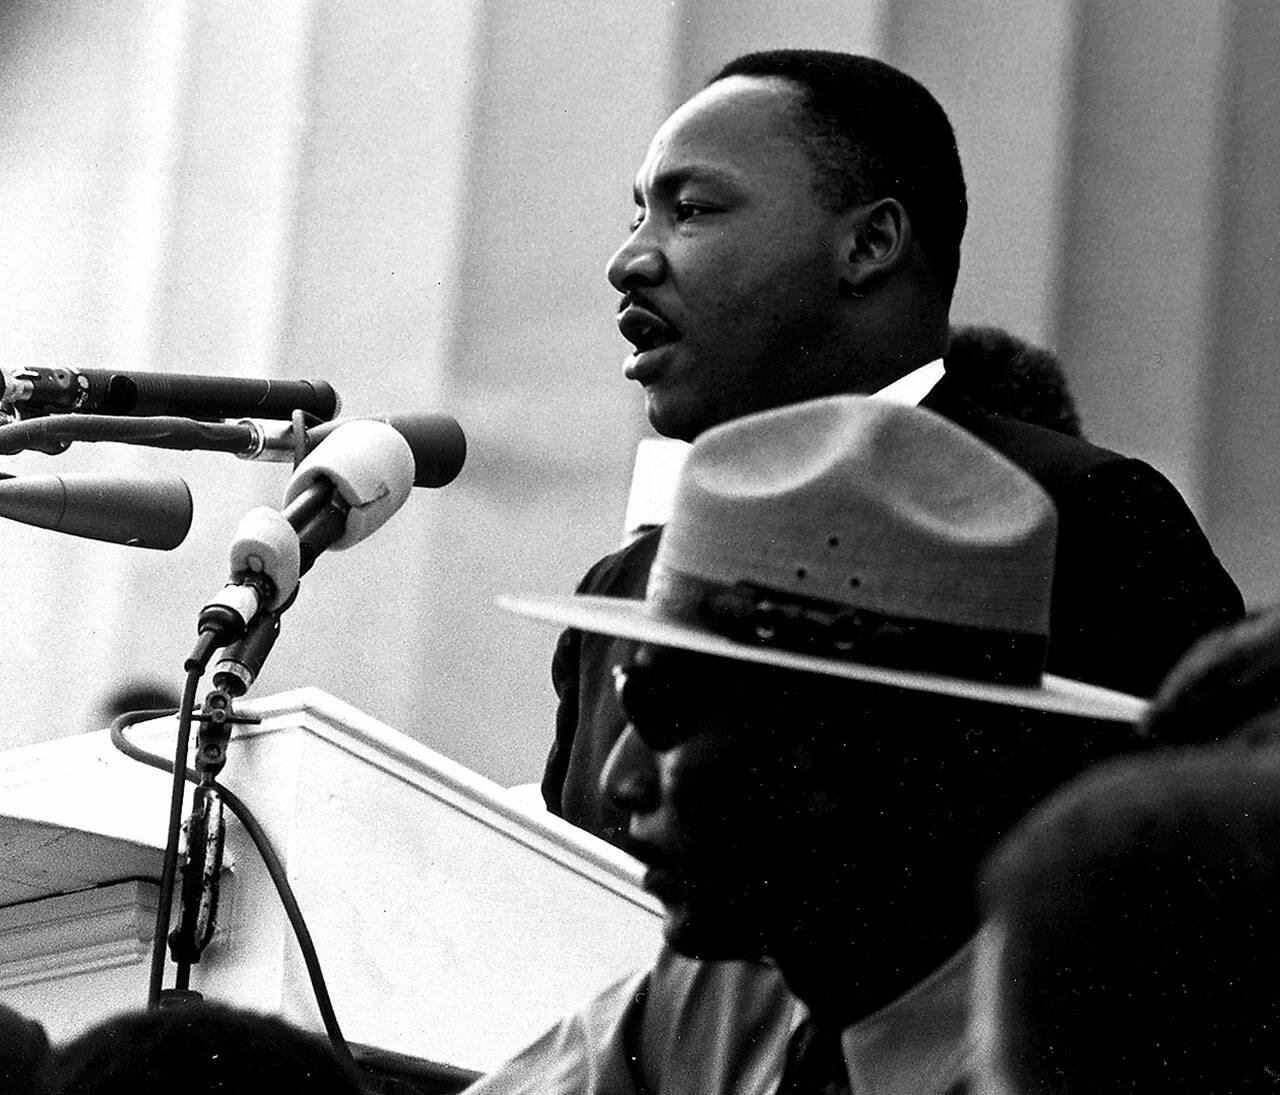 Martin Luther King Jr. giving his “I Have a Dream” speech during the March on Washington in Washington, D.C., in 1963. (National Archives)